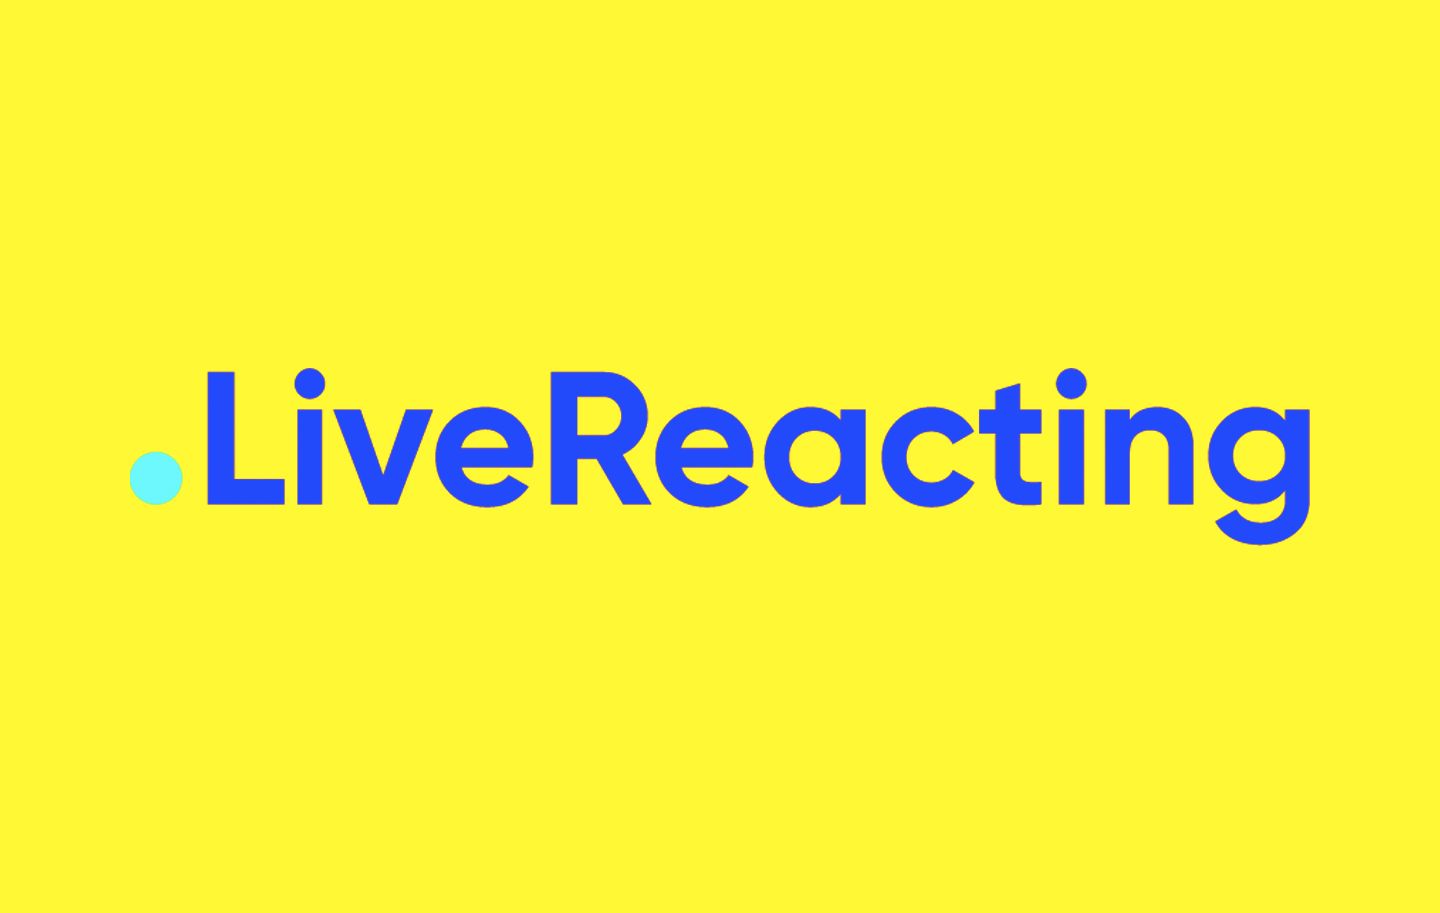 LiveReacting Software for Streaming